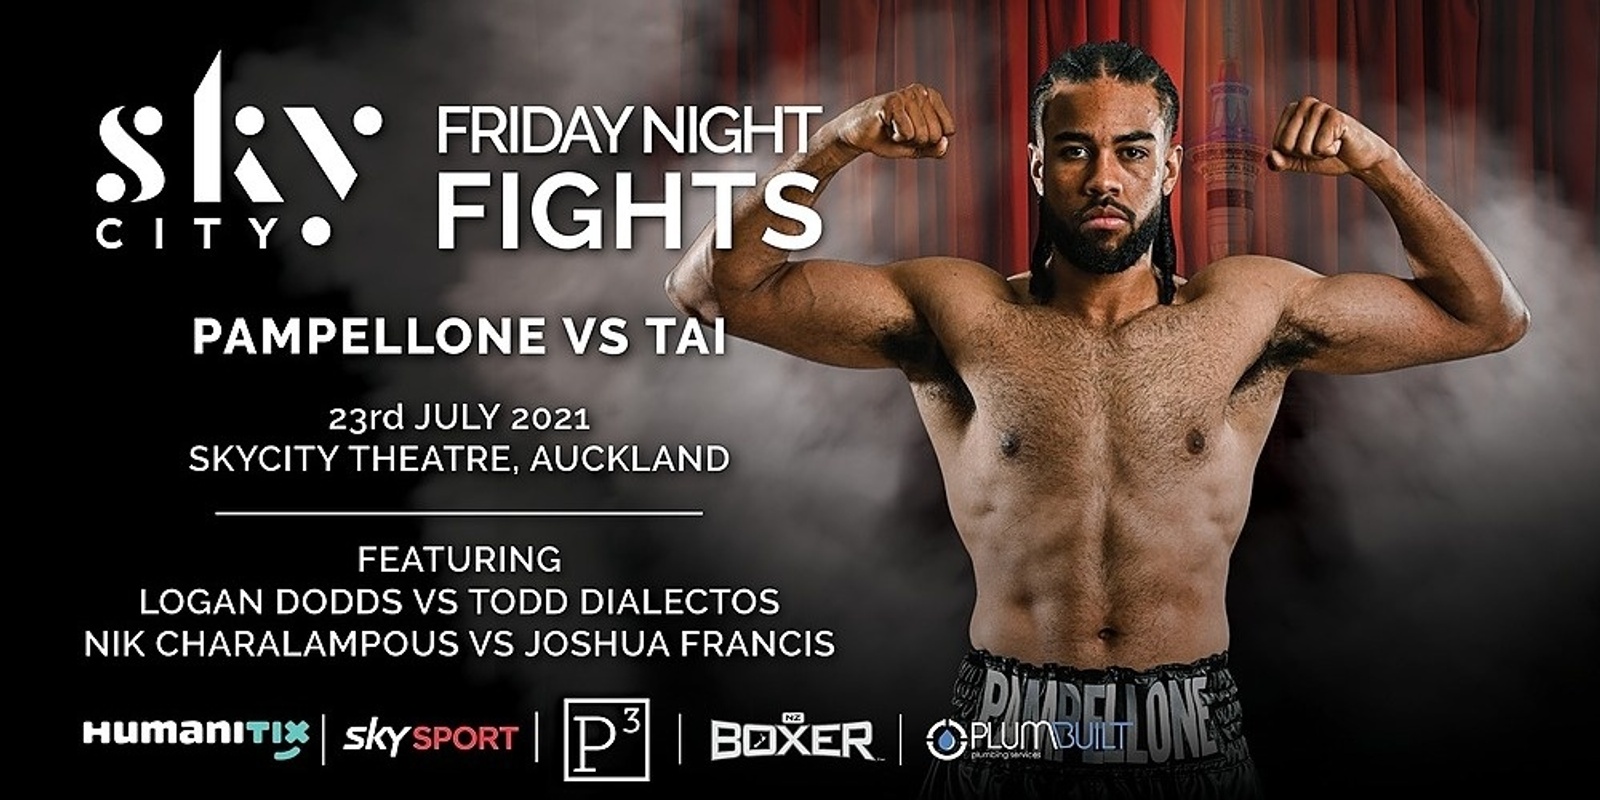 Banner image for SKYCITY FRIDAY NIGHT FIGHTS